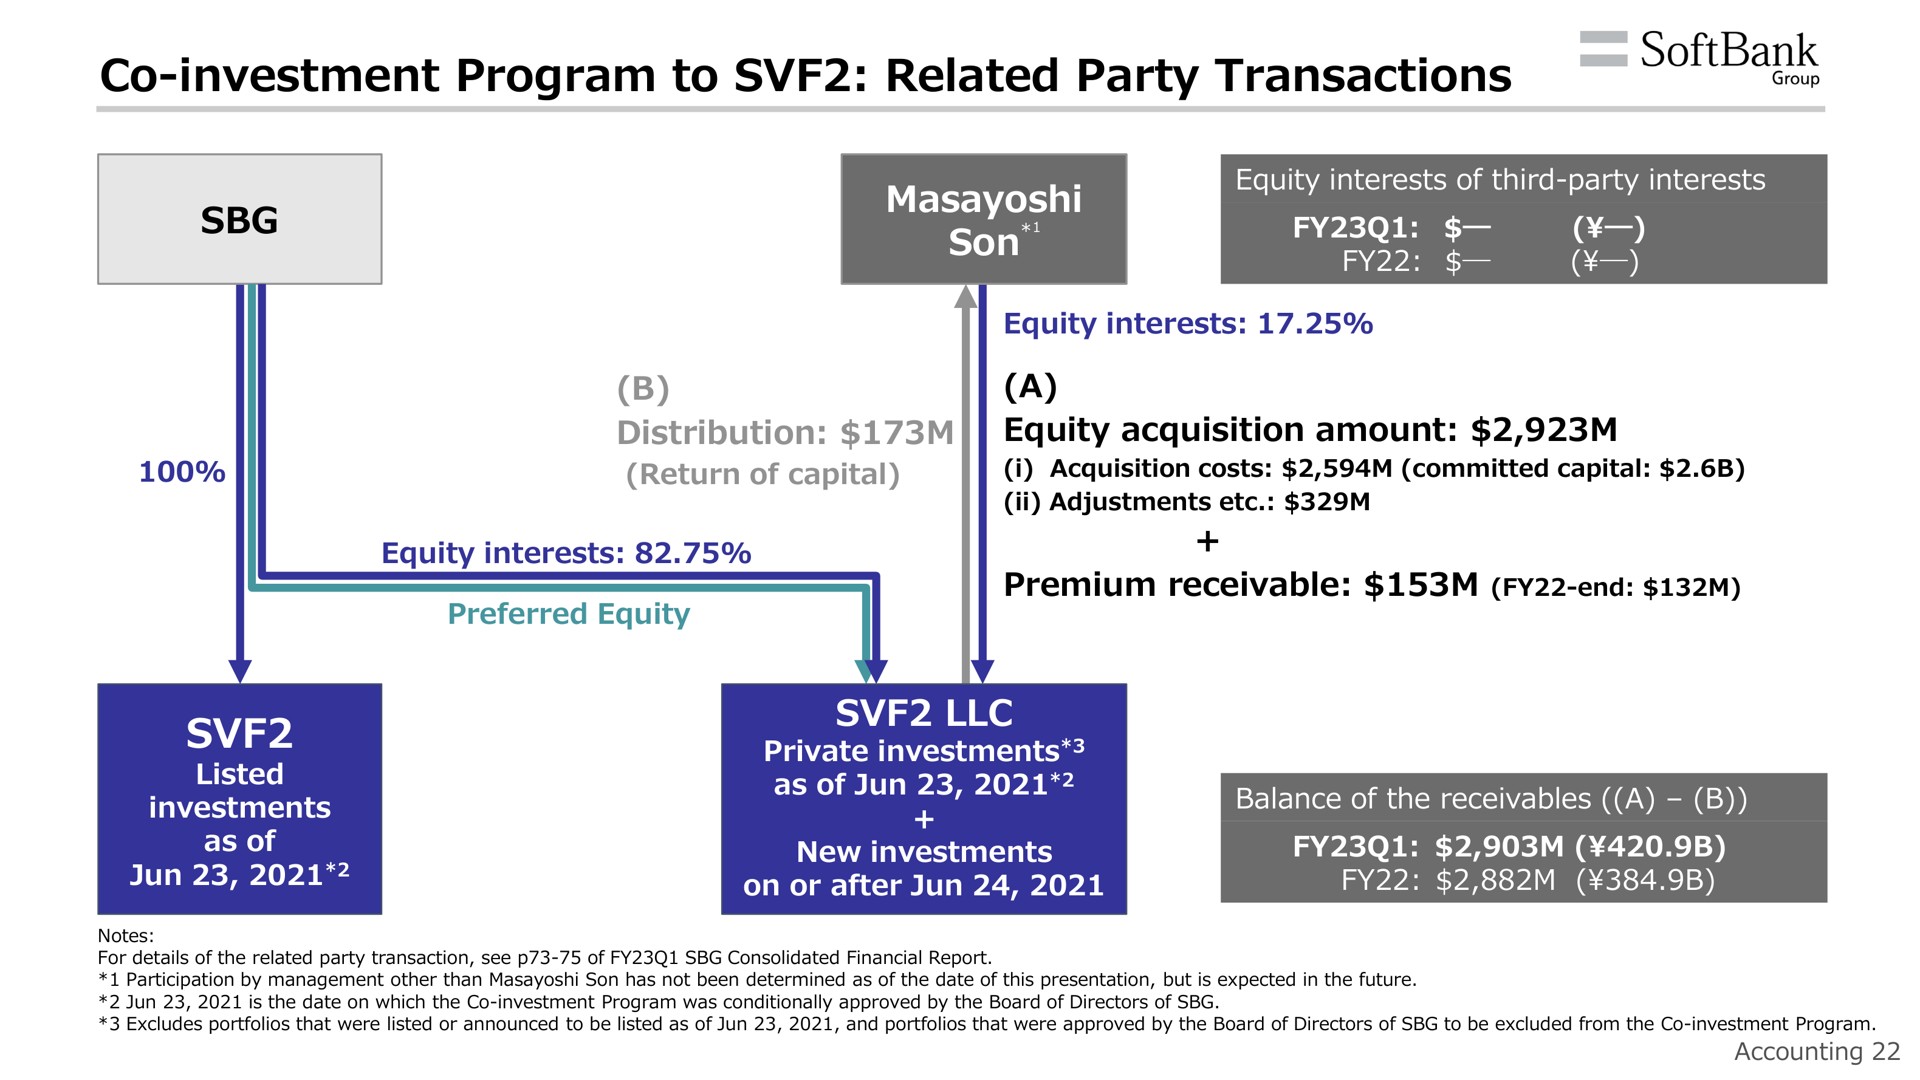 investment program to related party transactions | SoftBank